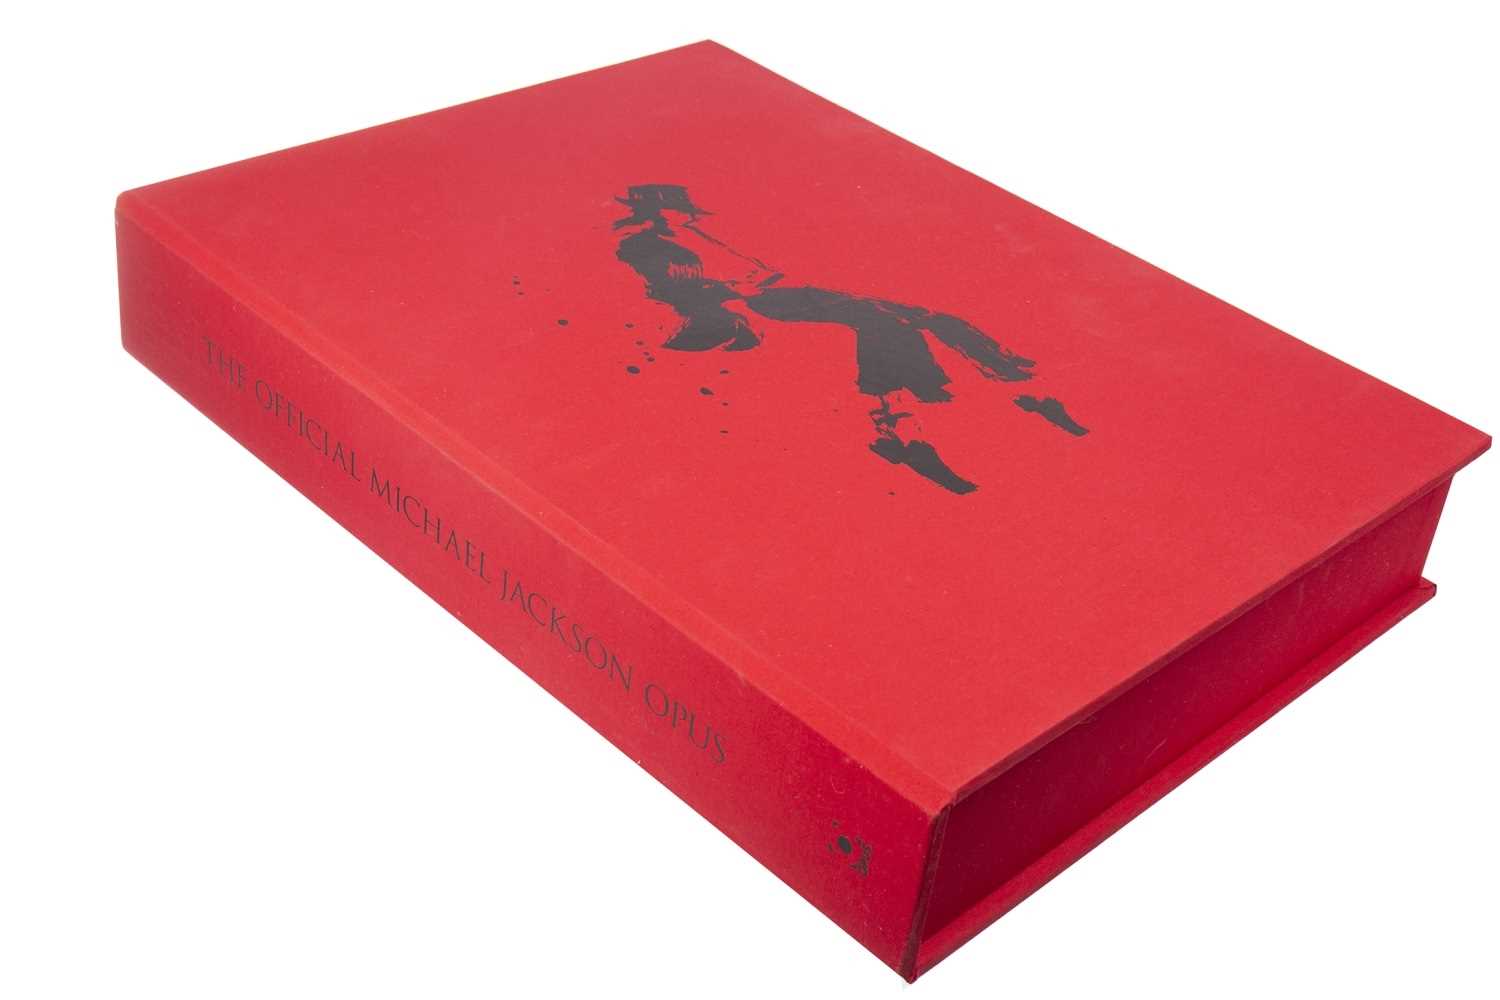 Lot 1626 - THE OFFICIAL MICHAEL JACKSON OPUS BOOK (2009)